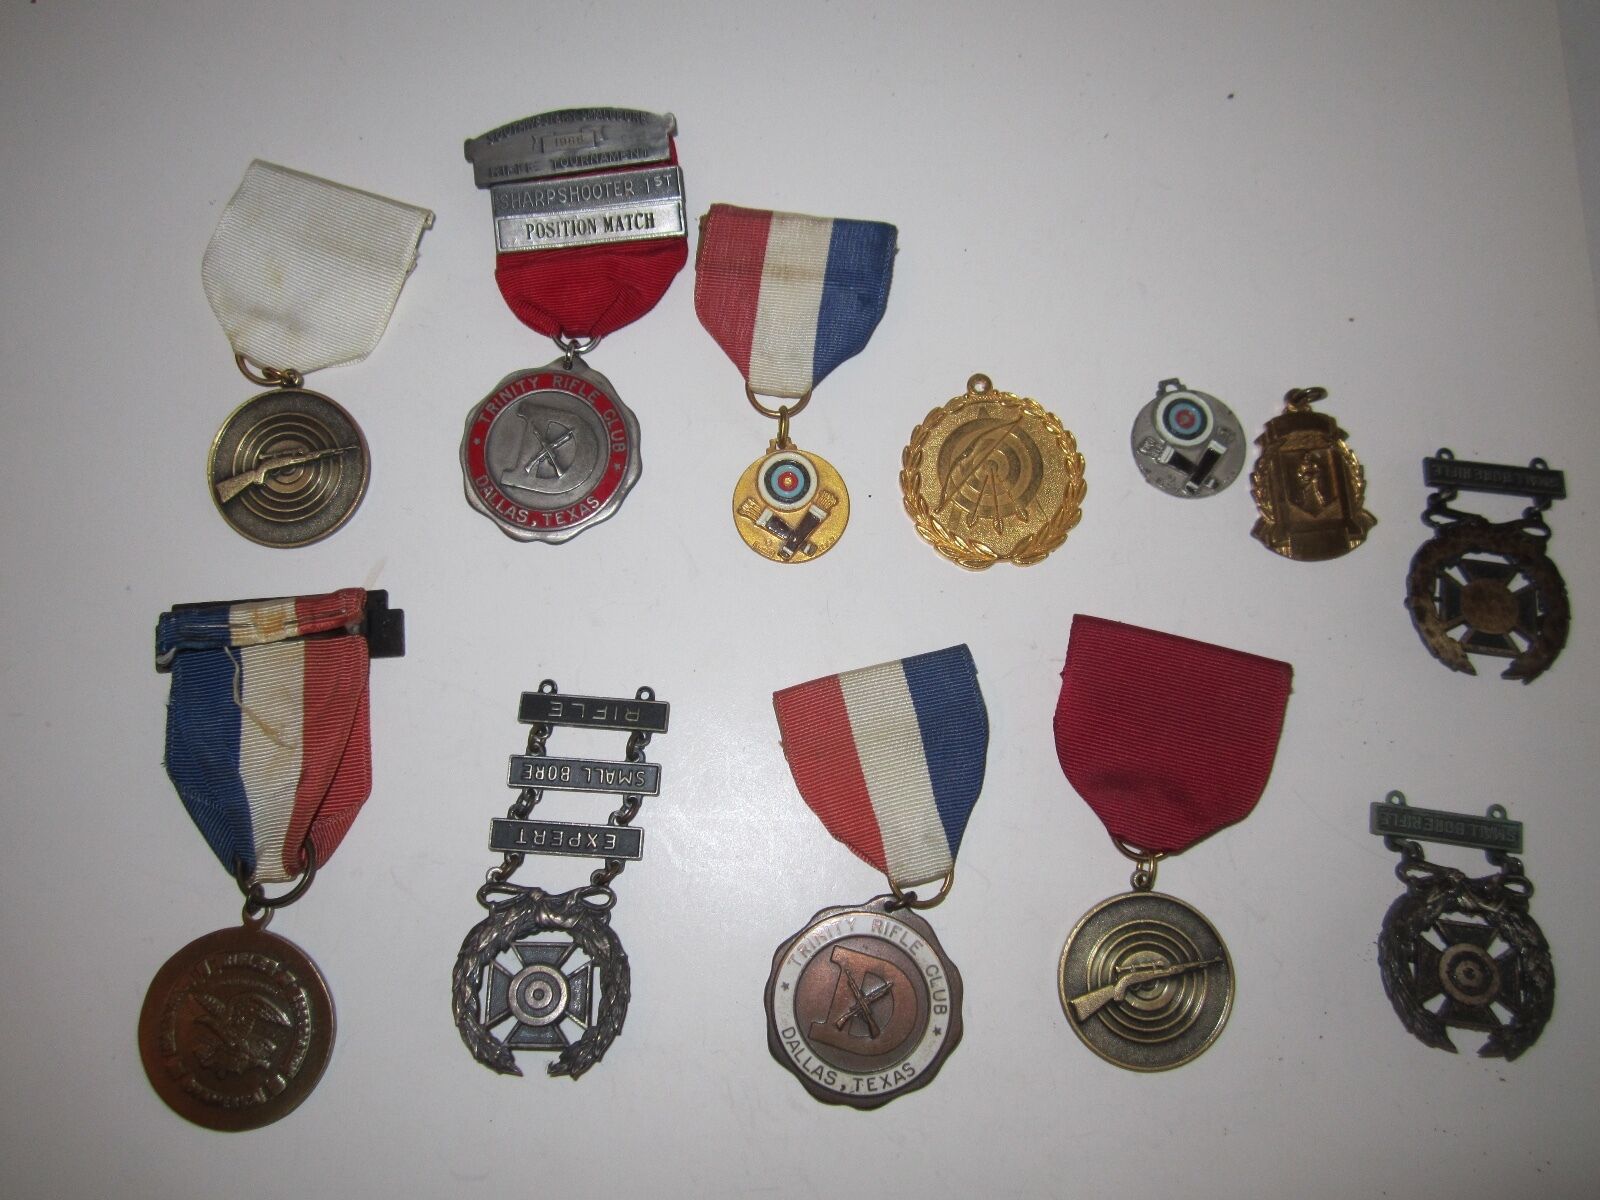 12 VTG ARCHERY & RIFLE SHOOTING MEDALS - SEE PICS - NICE - OFC-C